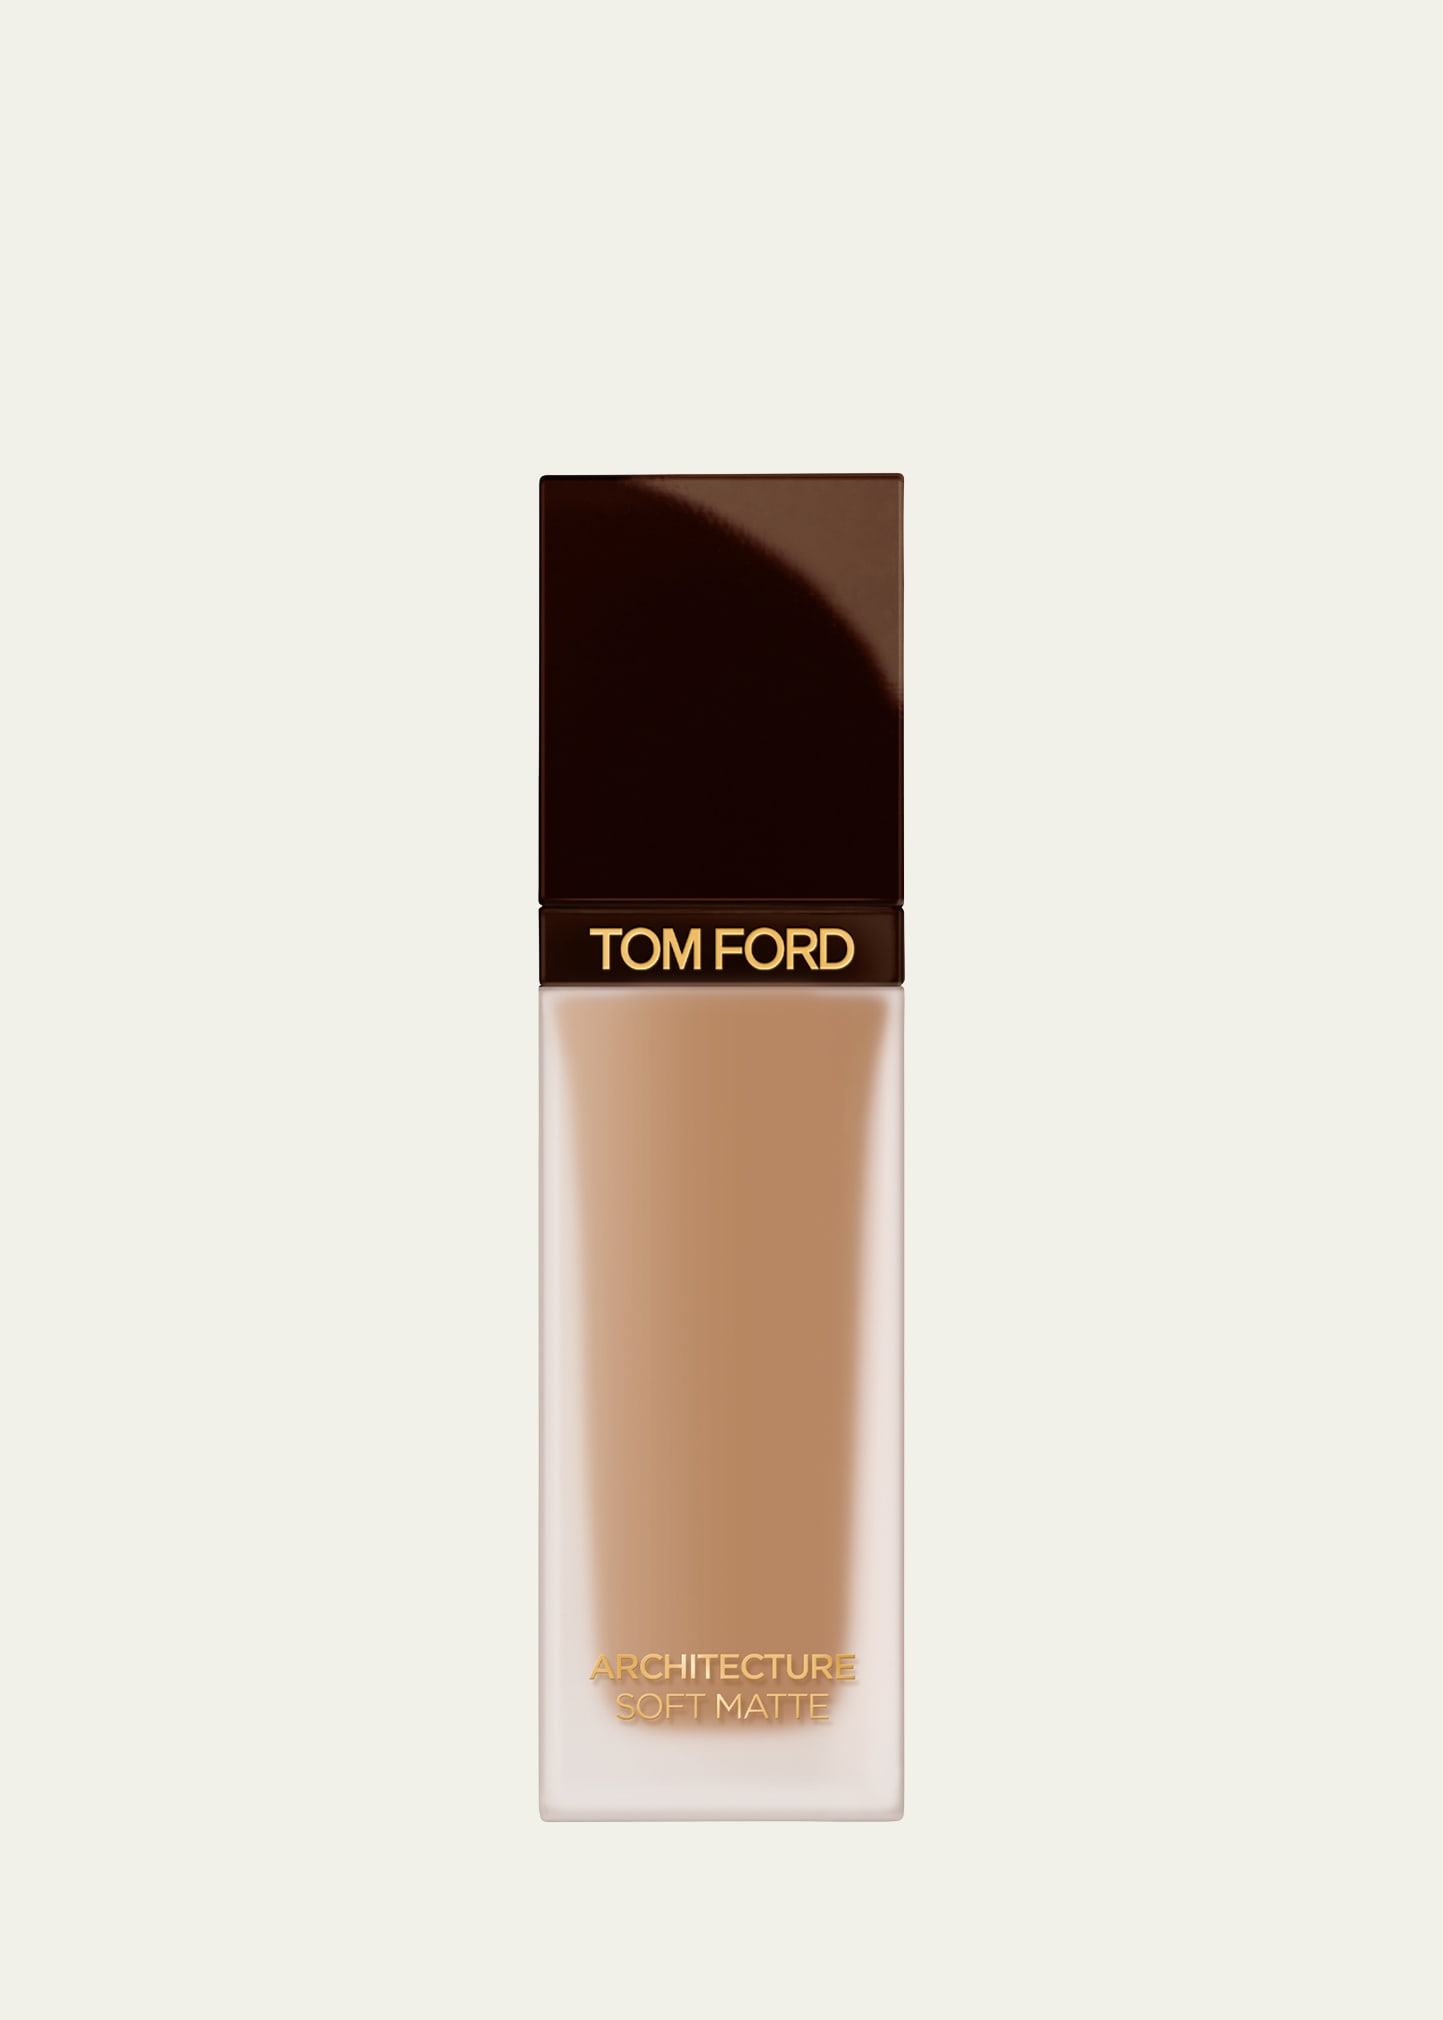 Tom Ford Architecture Soft Matte Foundation In Asm - 7.5 Shell B